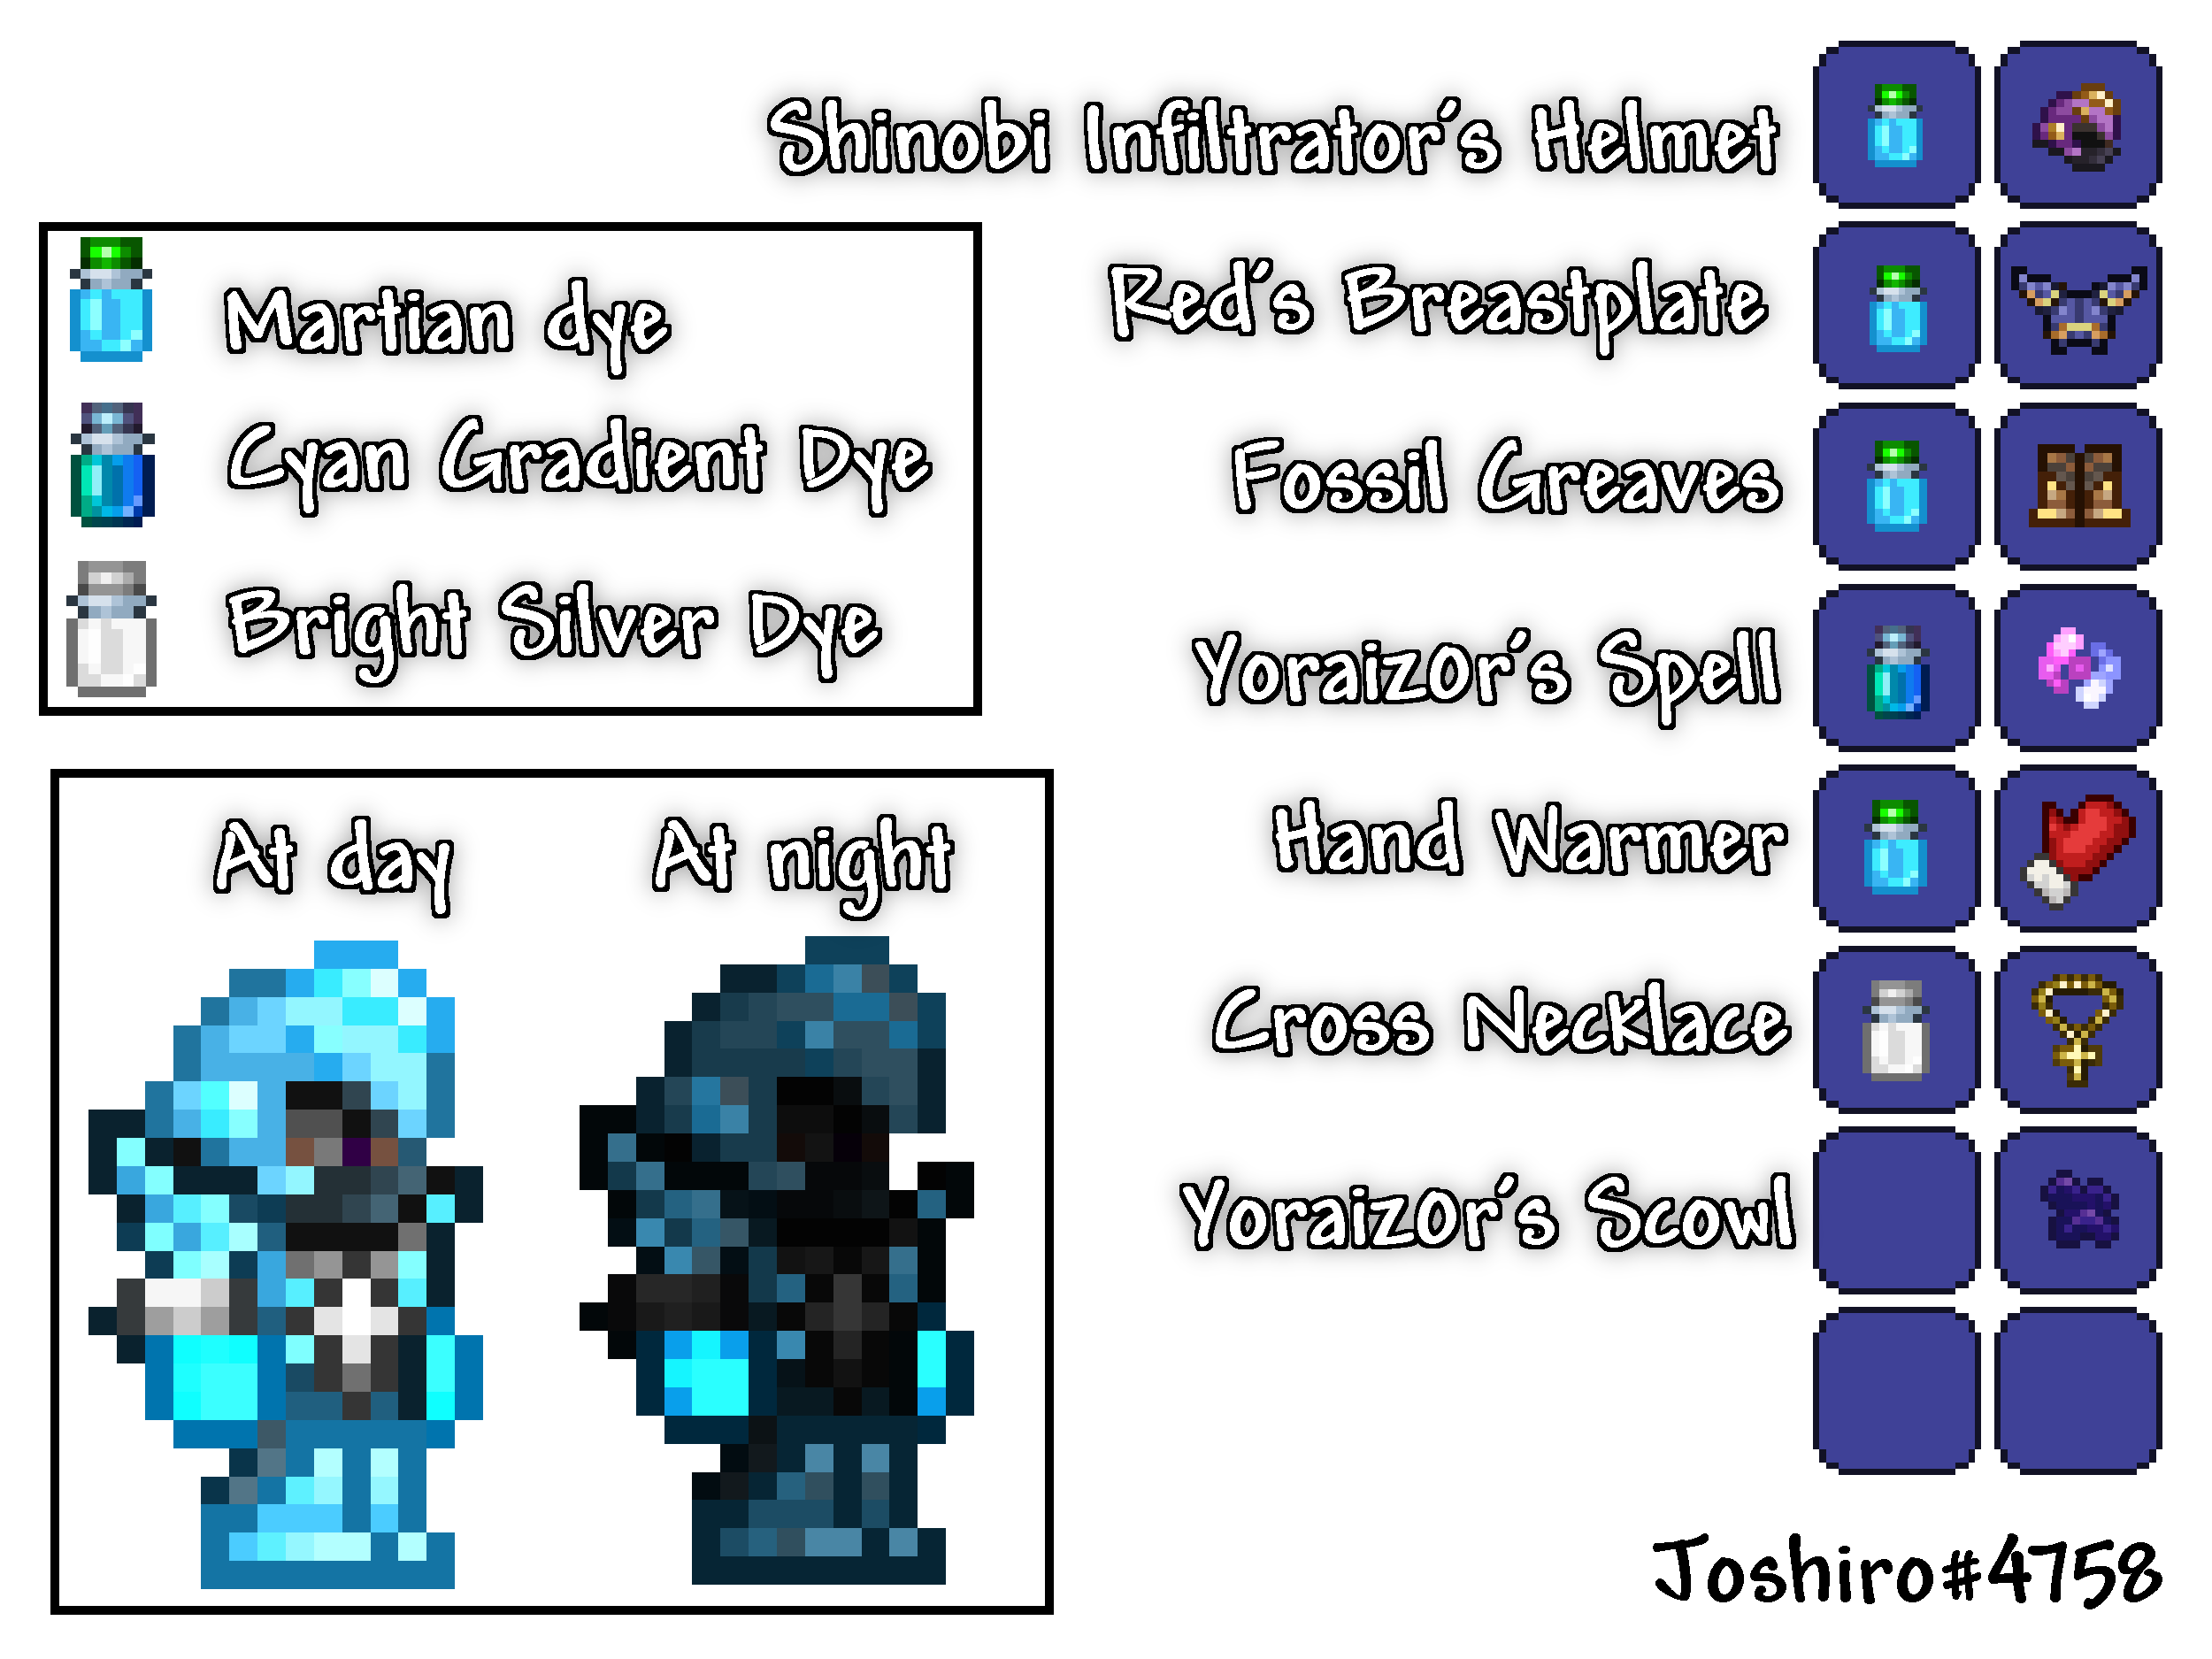 Joshirostar character for the banner.png